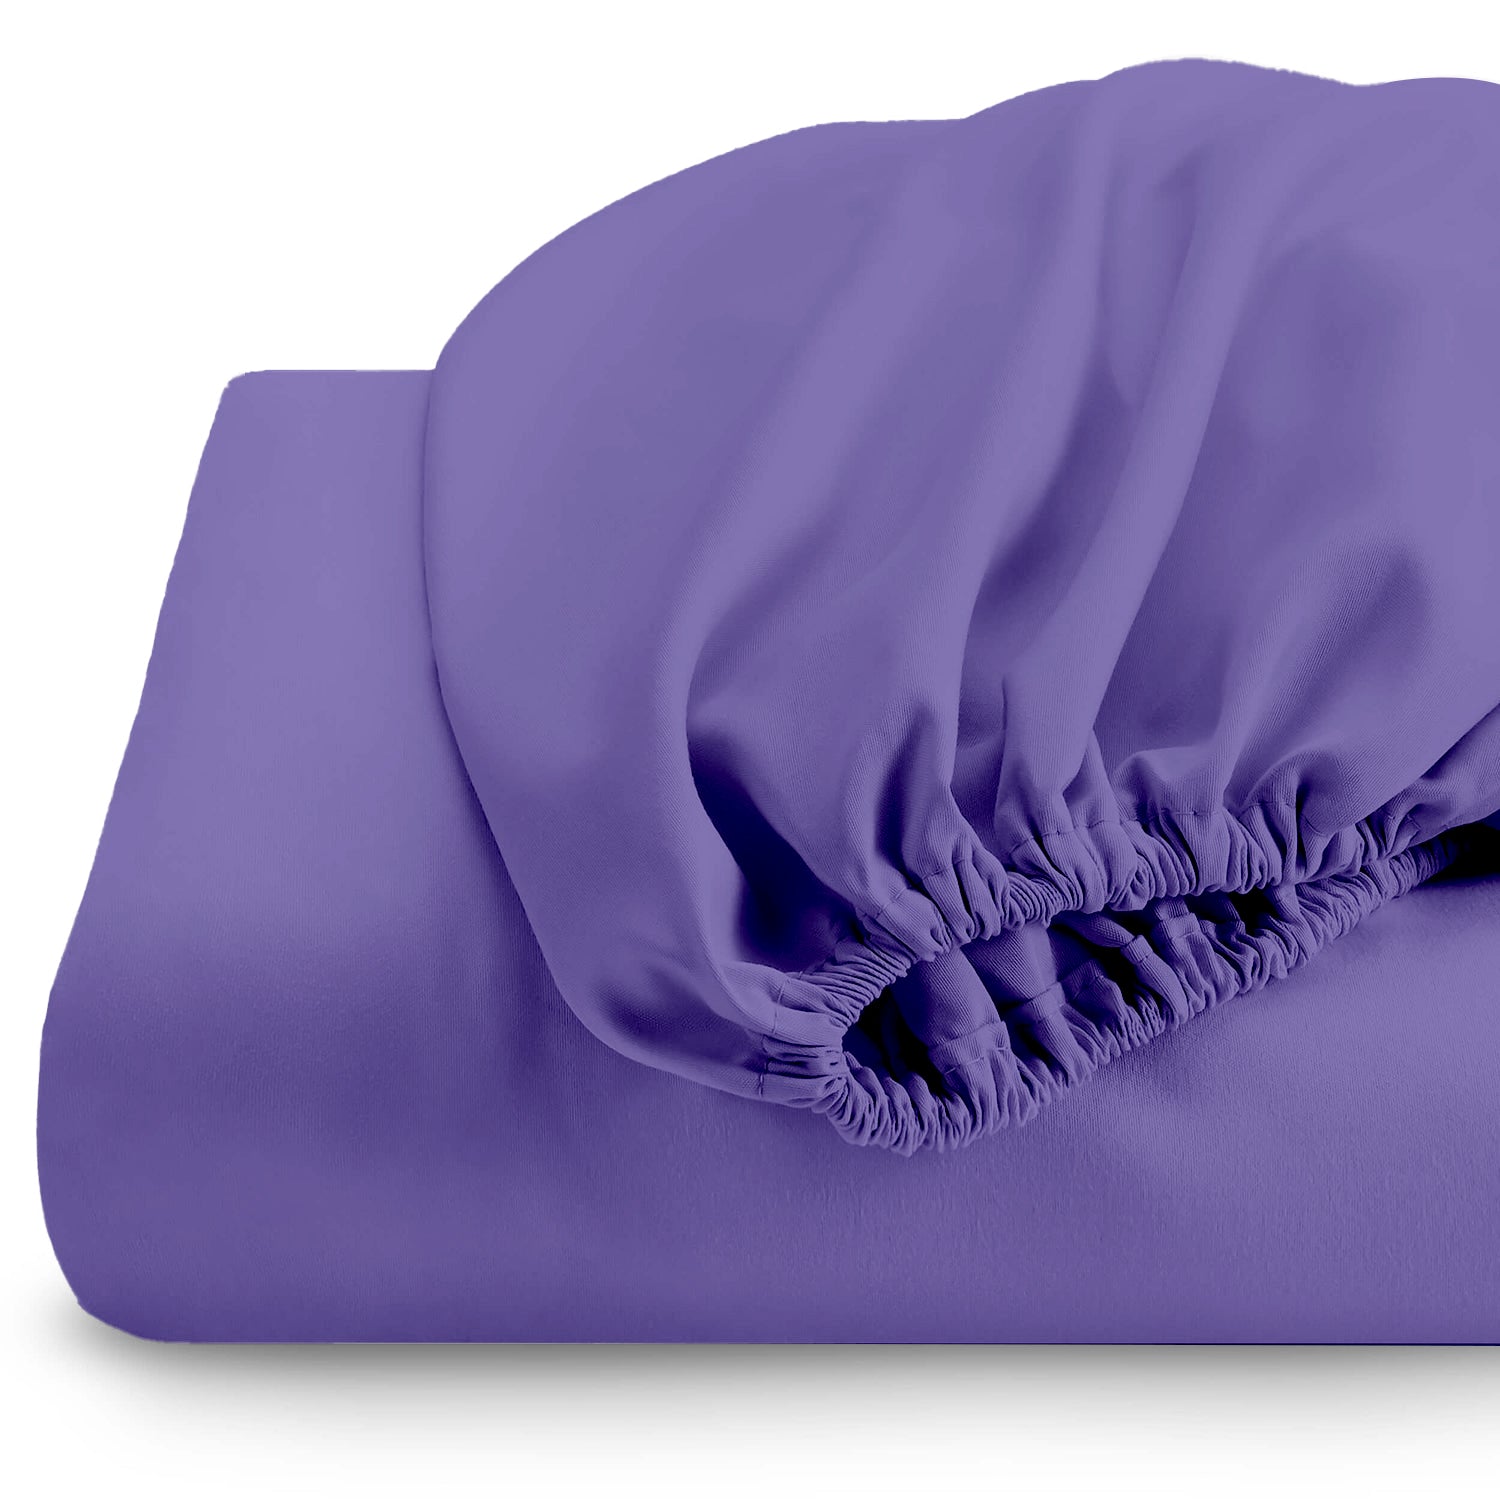 Premium Quality Super Soft Purple Fitted sheet 120x200+25 cm with Deep Pockets